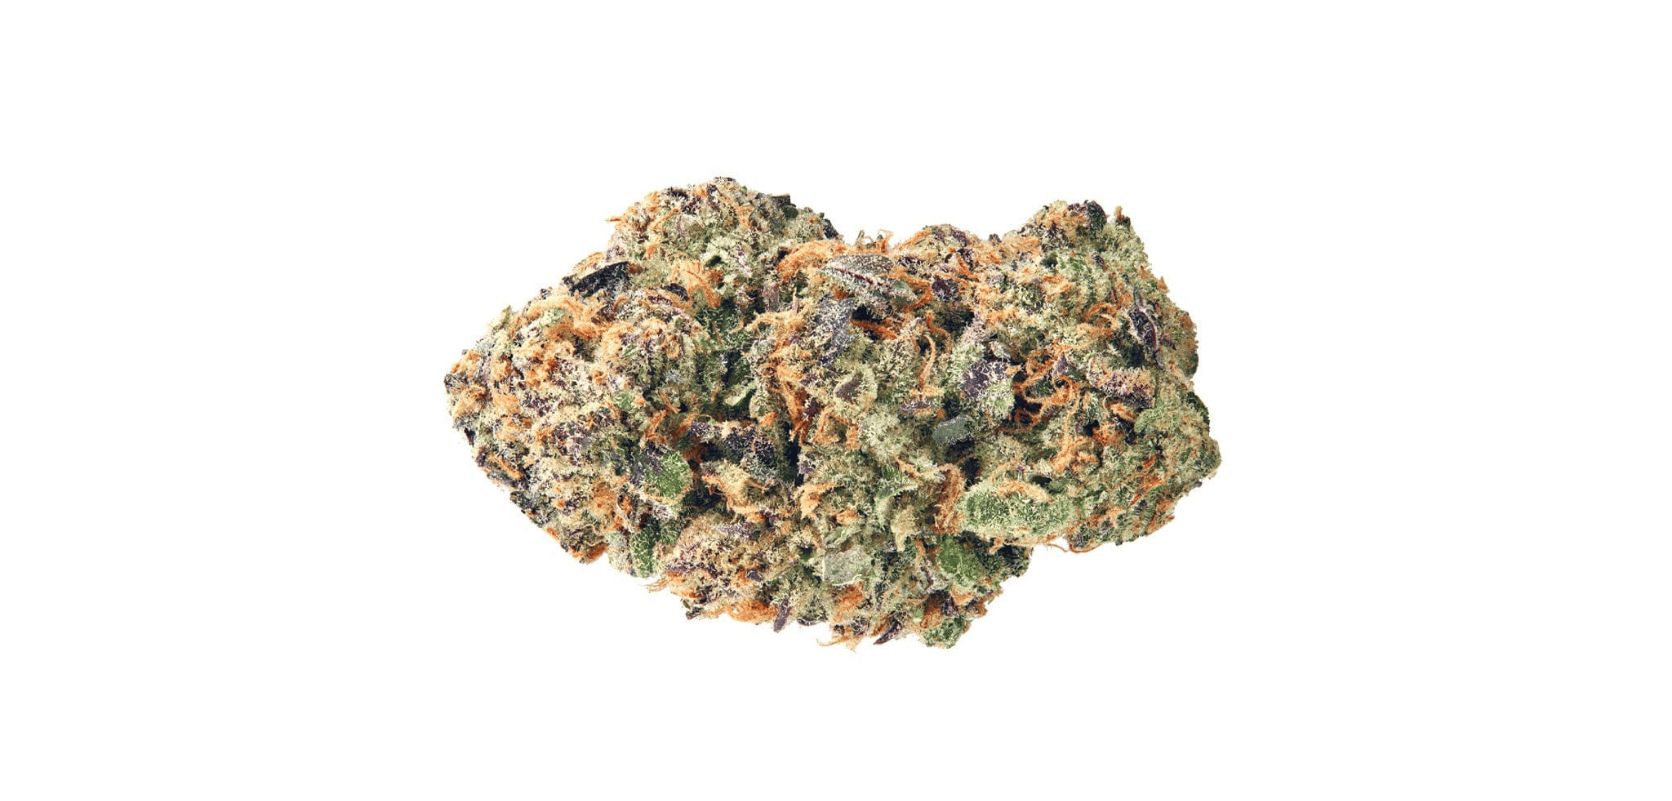 Jealousy is a well-balanced cannabis hybrid with a 50:50 indica to sativa ratio. It's also very potent, with THC levels that often reach 30%, so how does it make you feel?